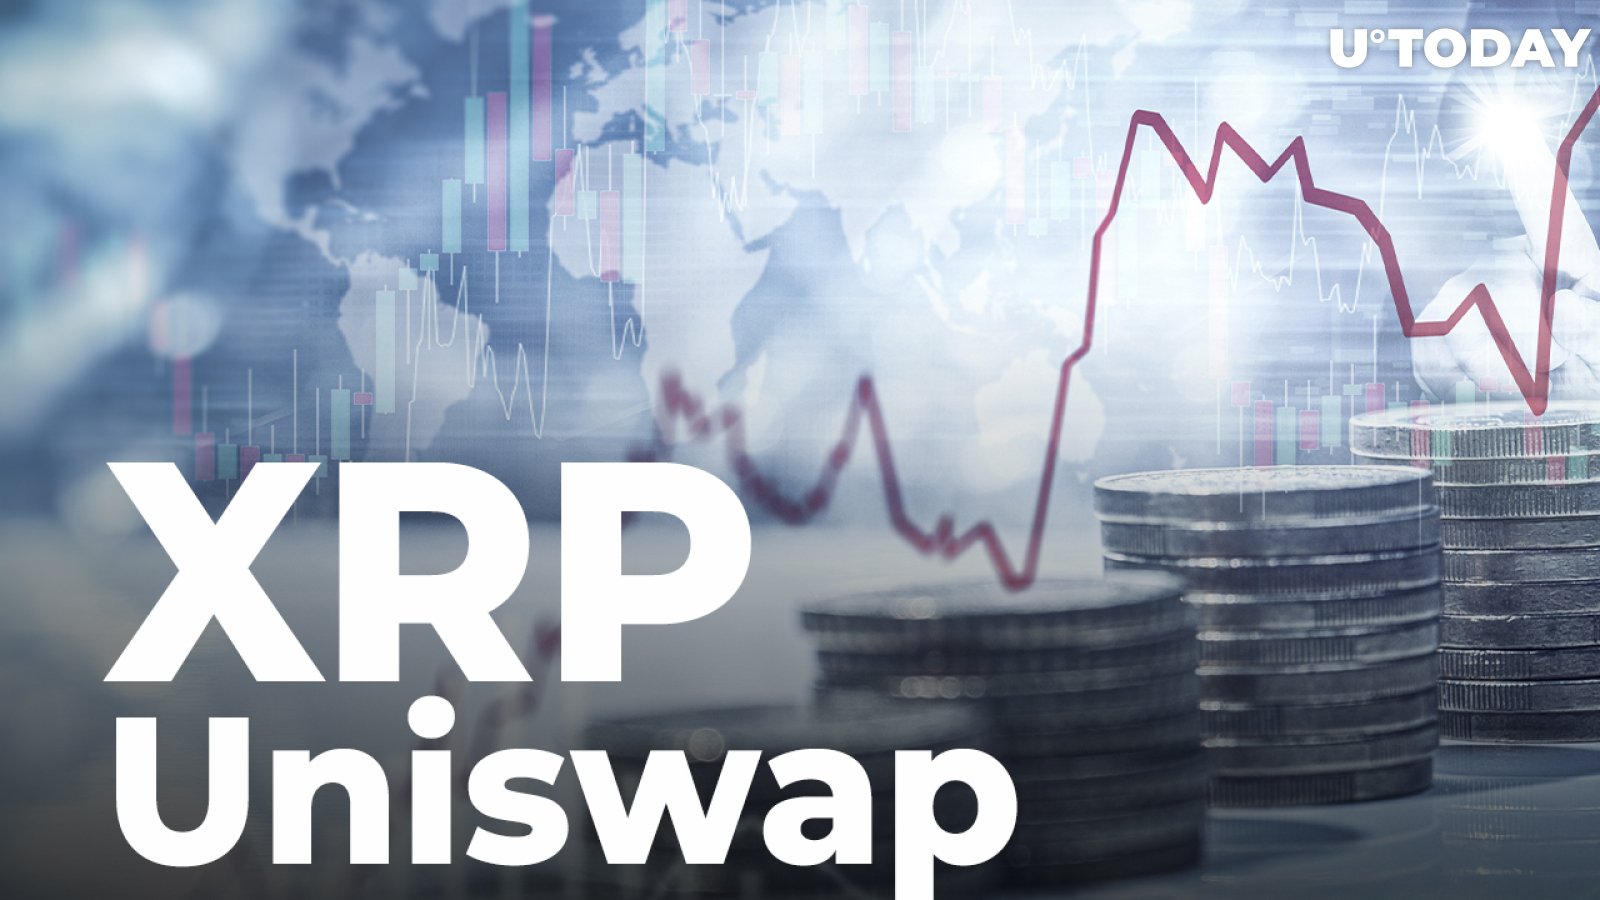 XRP and Uniswap Still Underbought per This On-chain Data